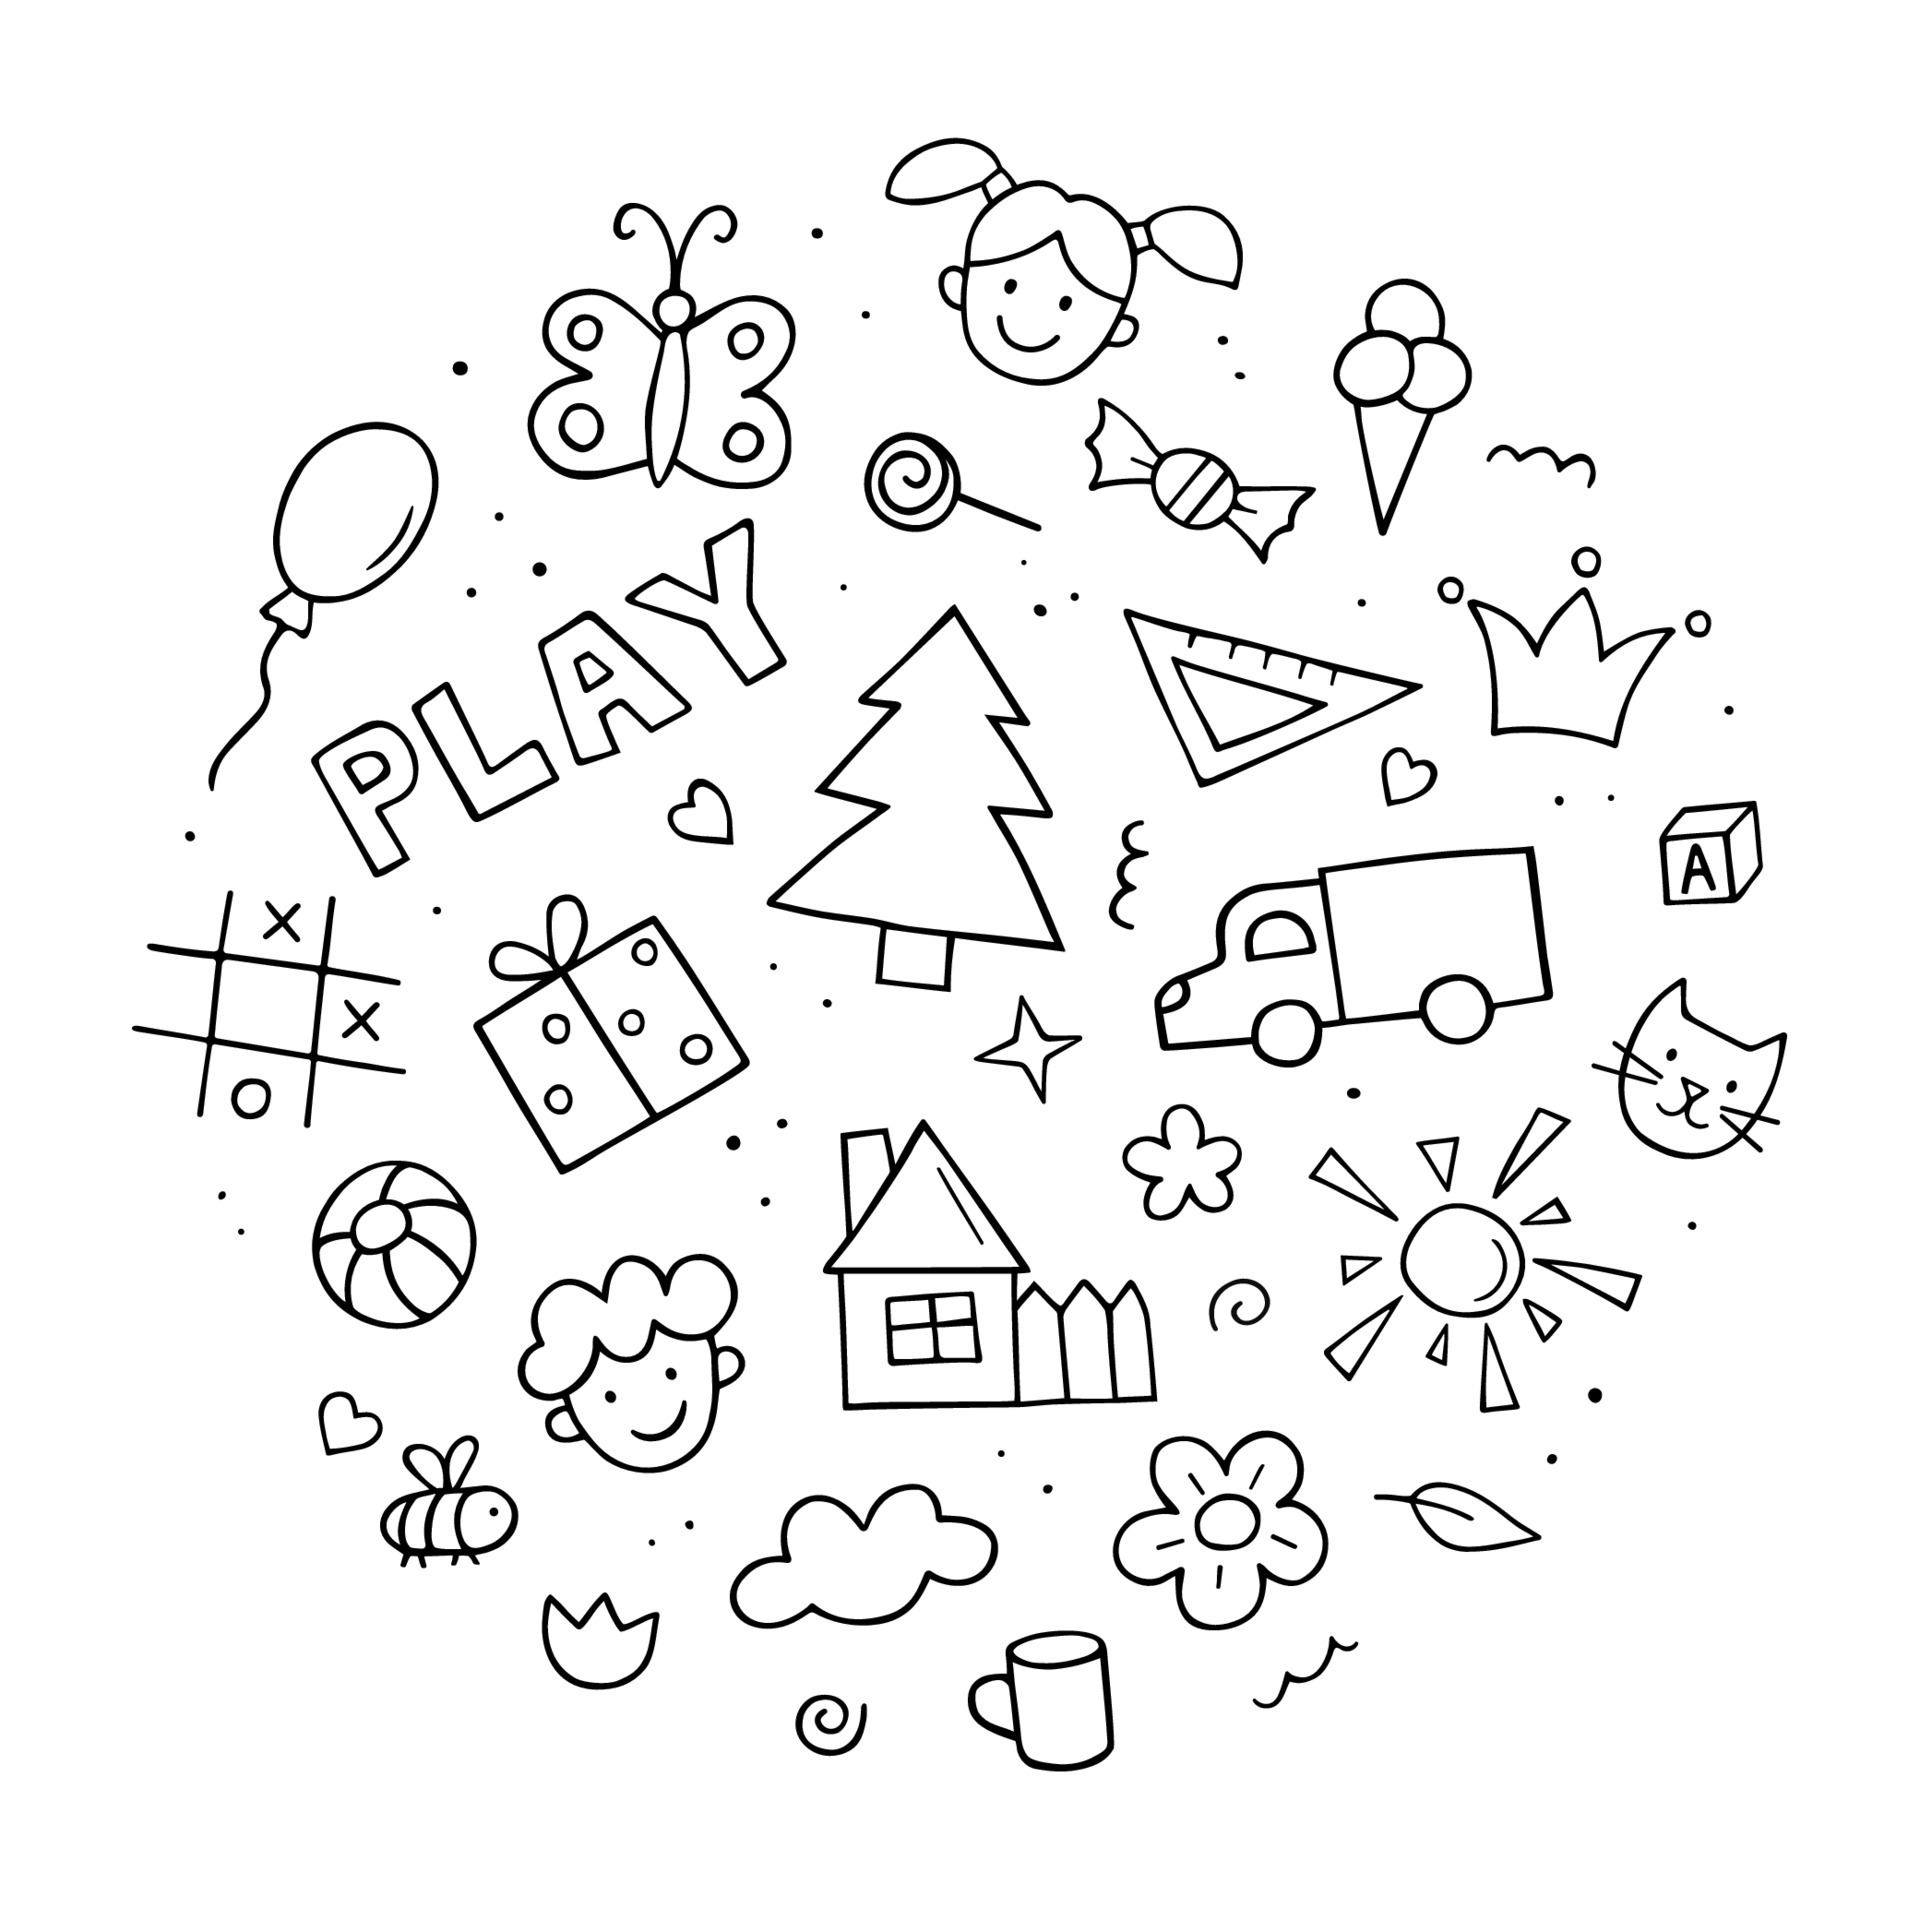 https://static.vecteezy.com/system/resources/previews/006/920/002/original/set-of-children-drawings-hand-drawn-collection-of-cute-kids-doodles-black-and-white-outline-circular-composition-vector.jpg